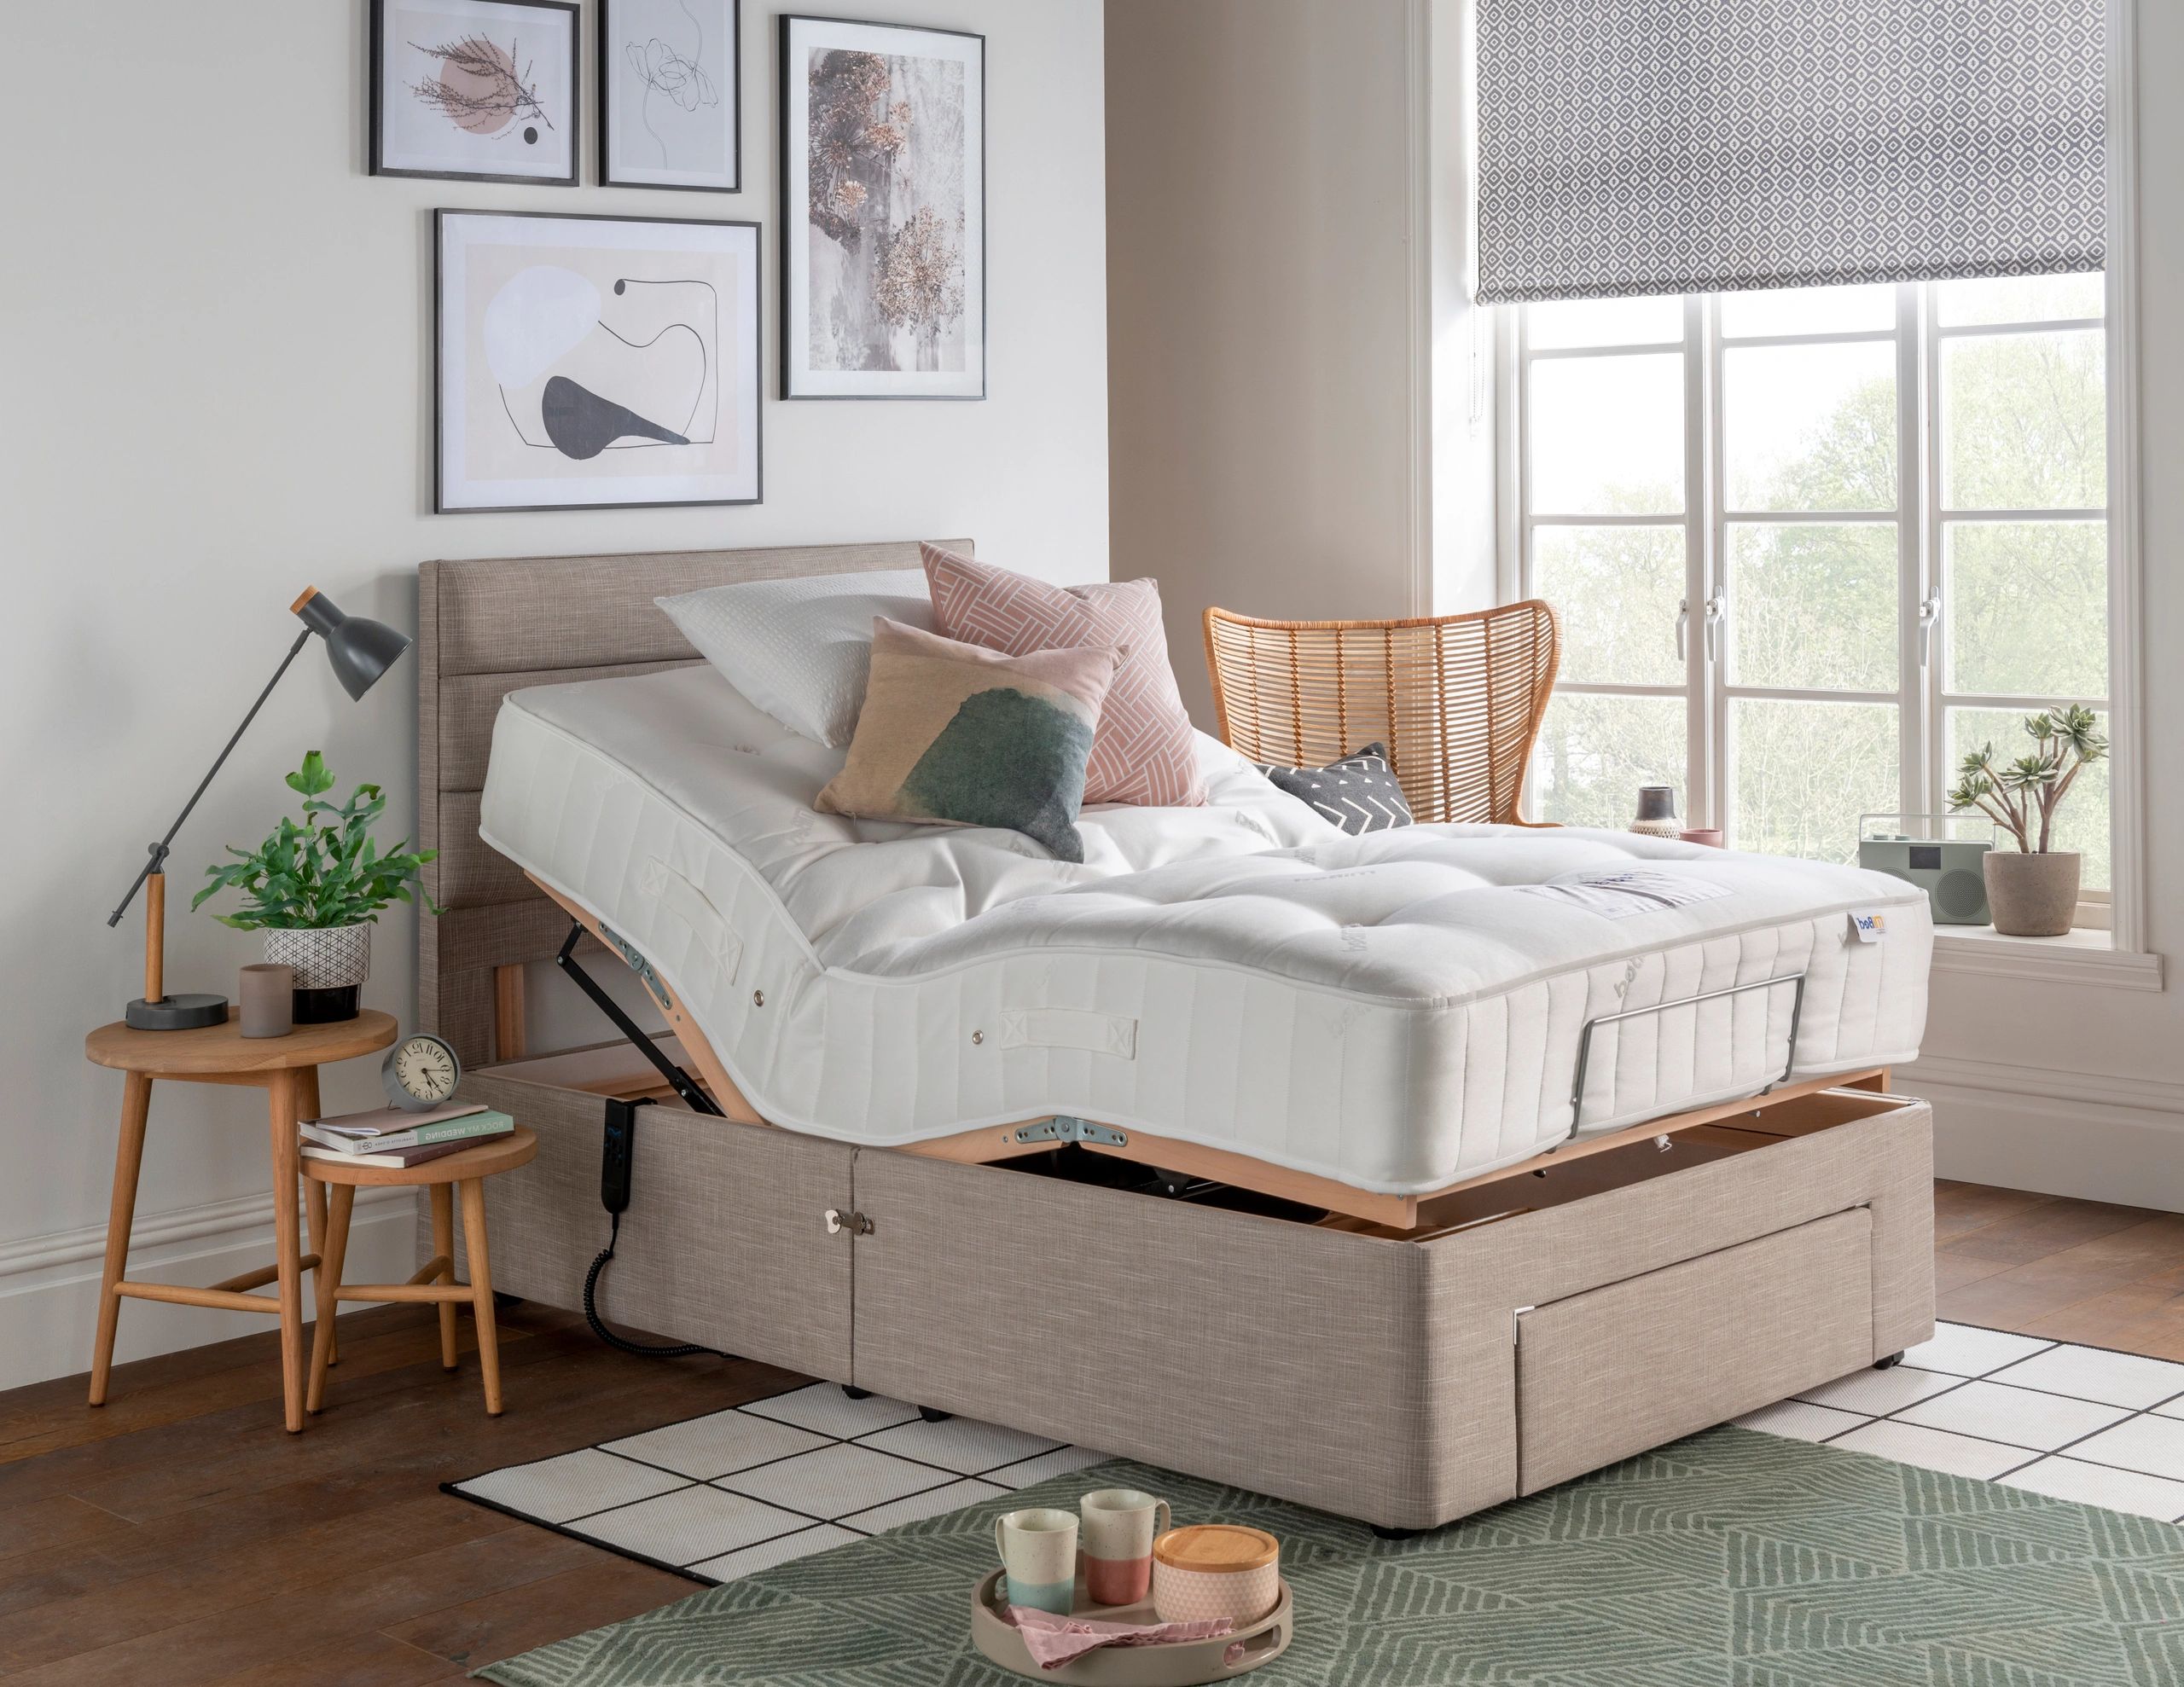 small double bed with soft mattress